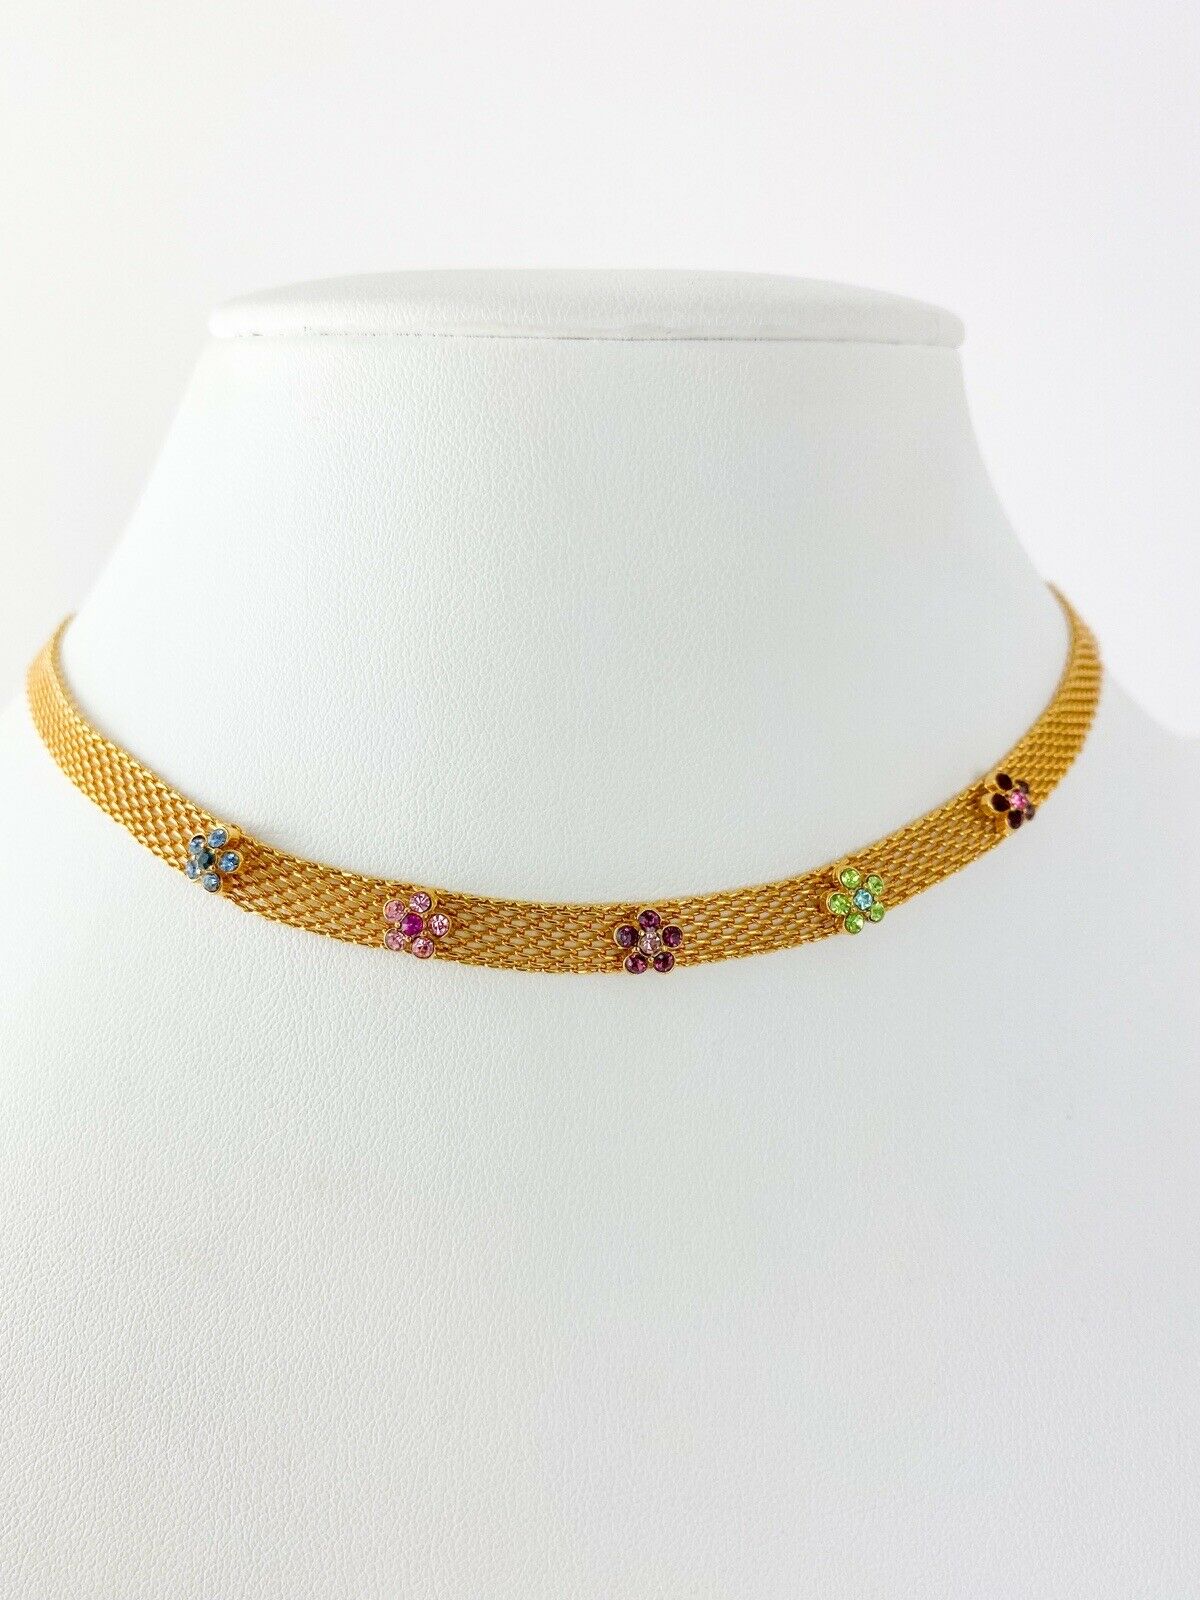 【SOLD OUT】BIJOUX Givenchy Gold Tone Vintage Choker Necklace Flower Multi-Color Rhinestone